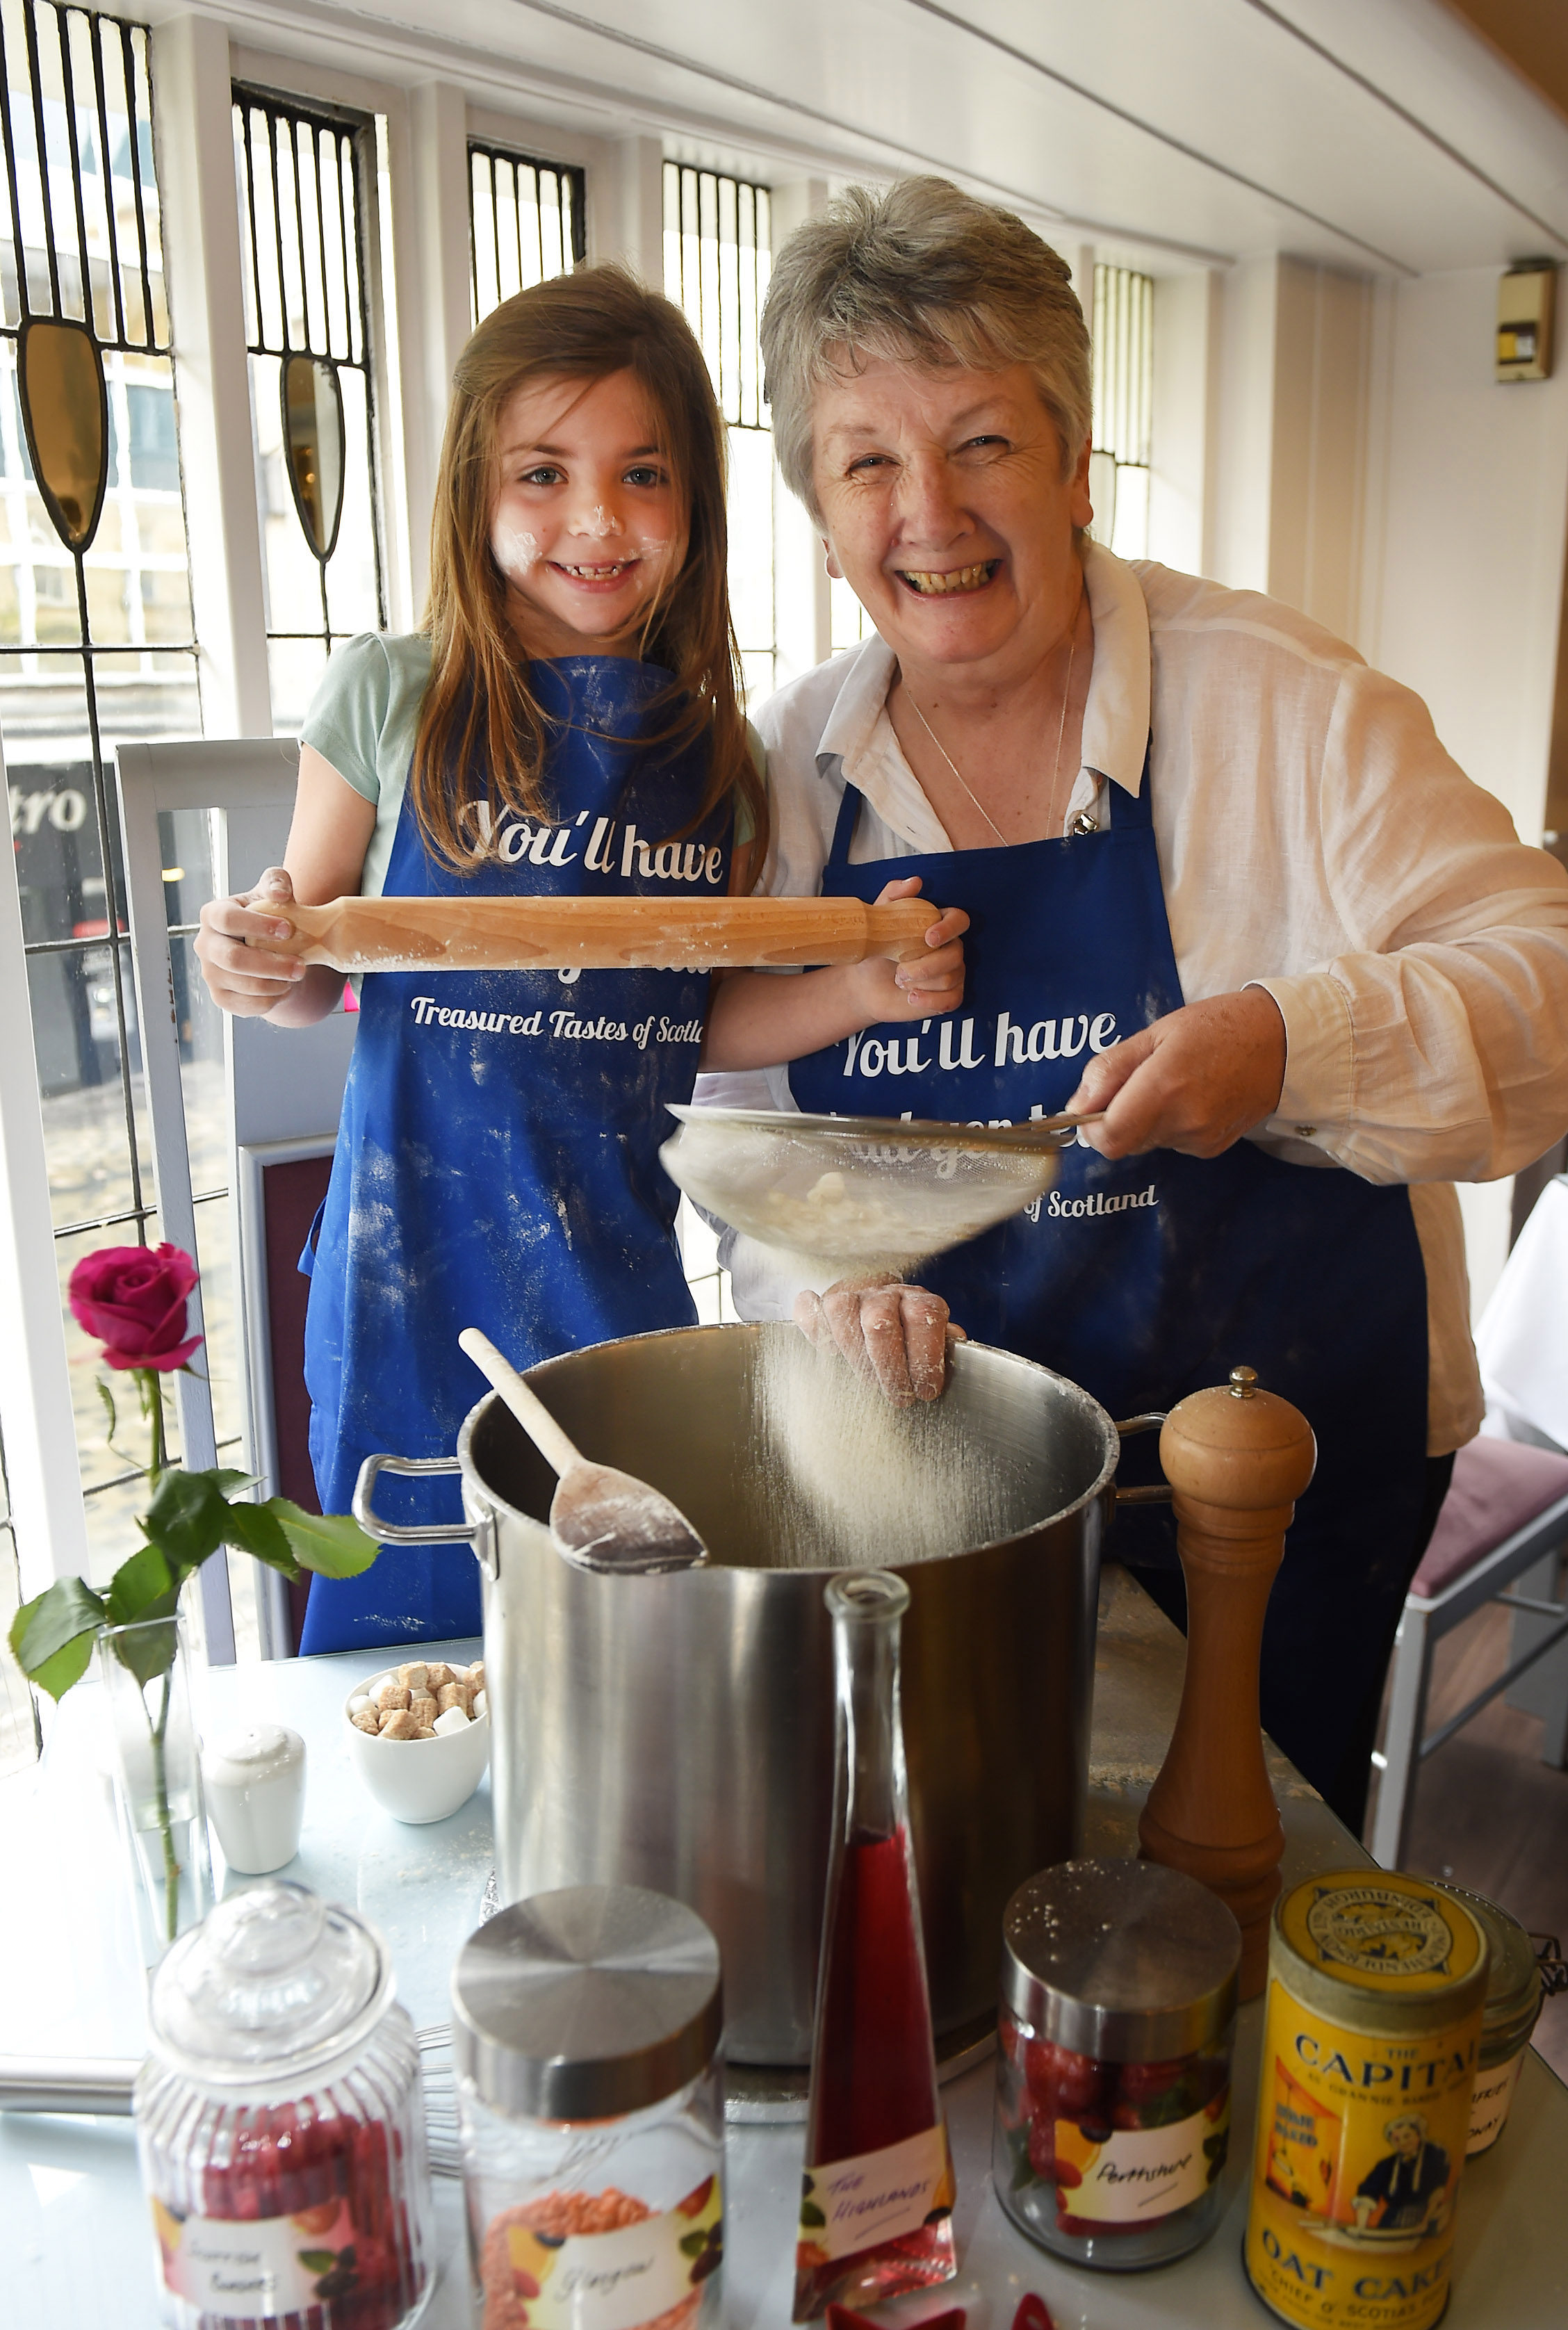 Now You're Cooking!Launch of Treasured tastes Of Scotland at the Willow Tearooms,GlasgowPic shows Darcy Burnham (7) from Troon with Shirley Spear , owner of the world renowned restaurant The Three Chimneys in Skye.